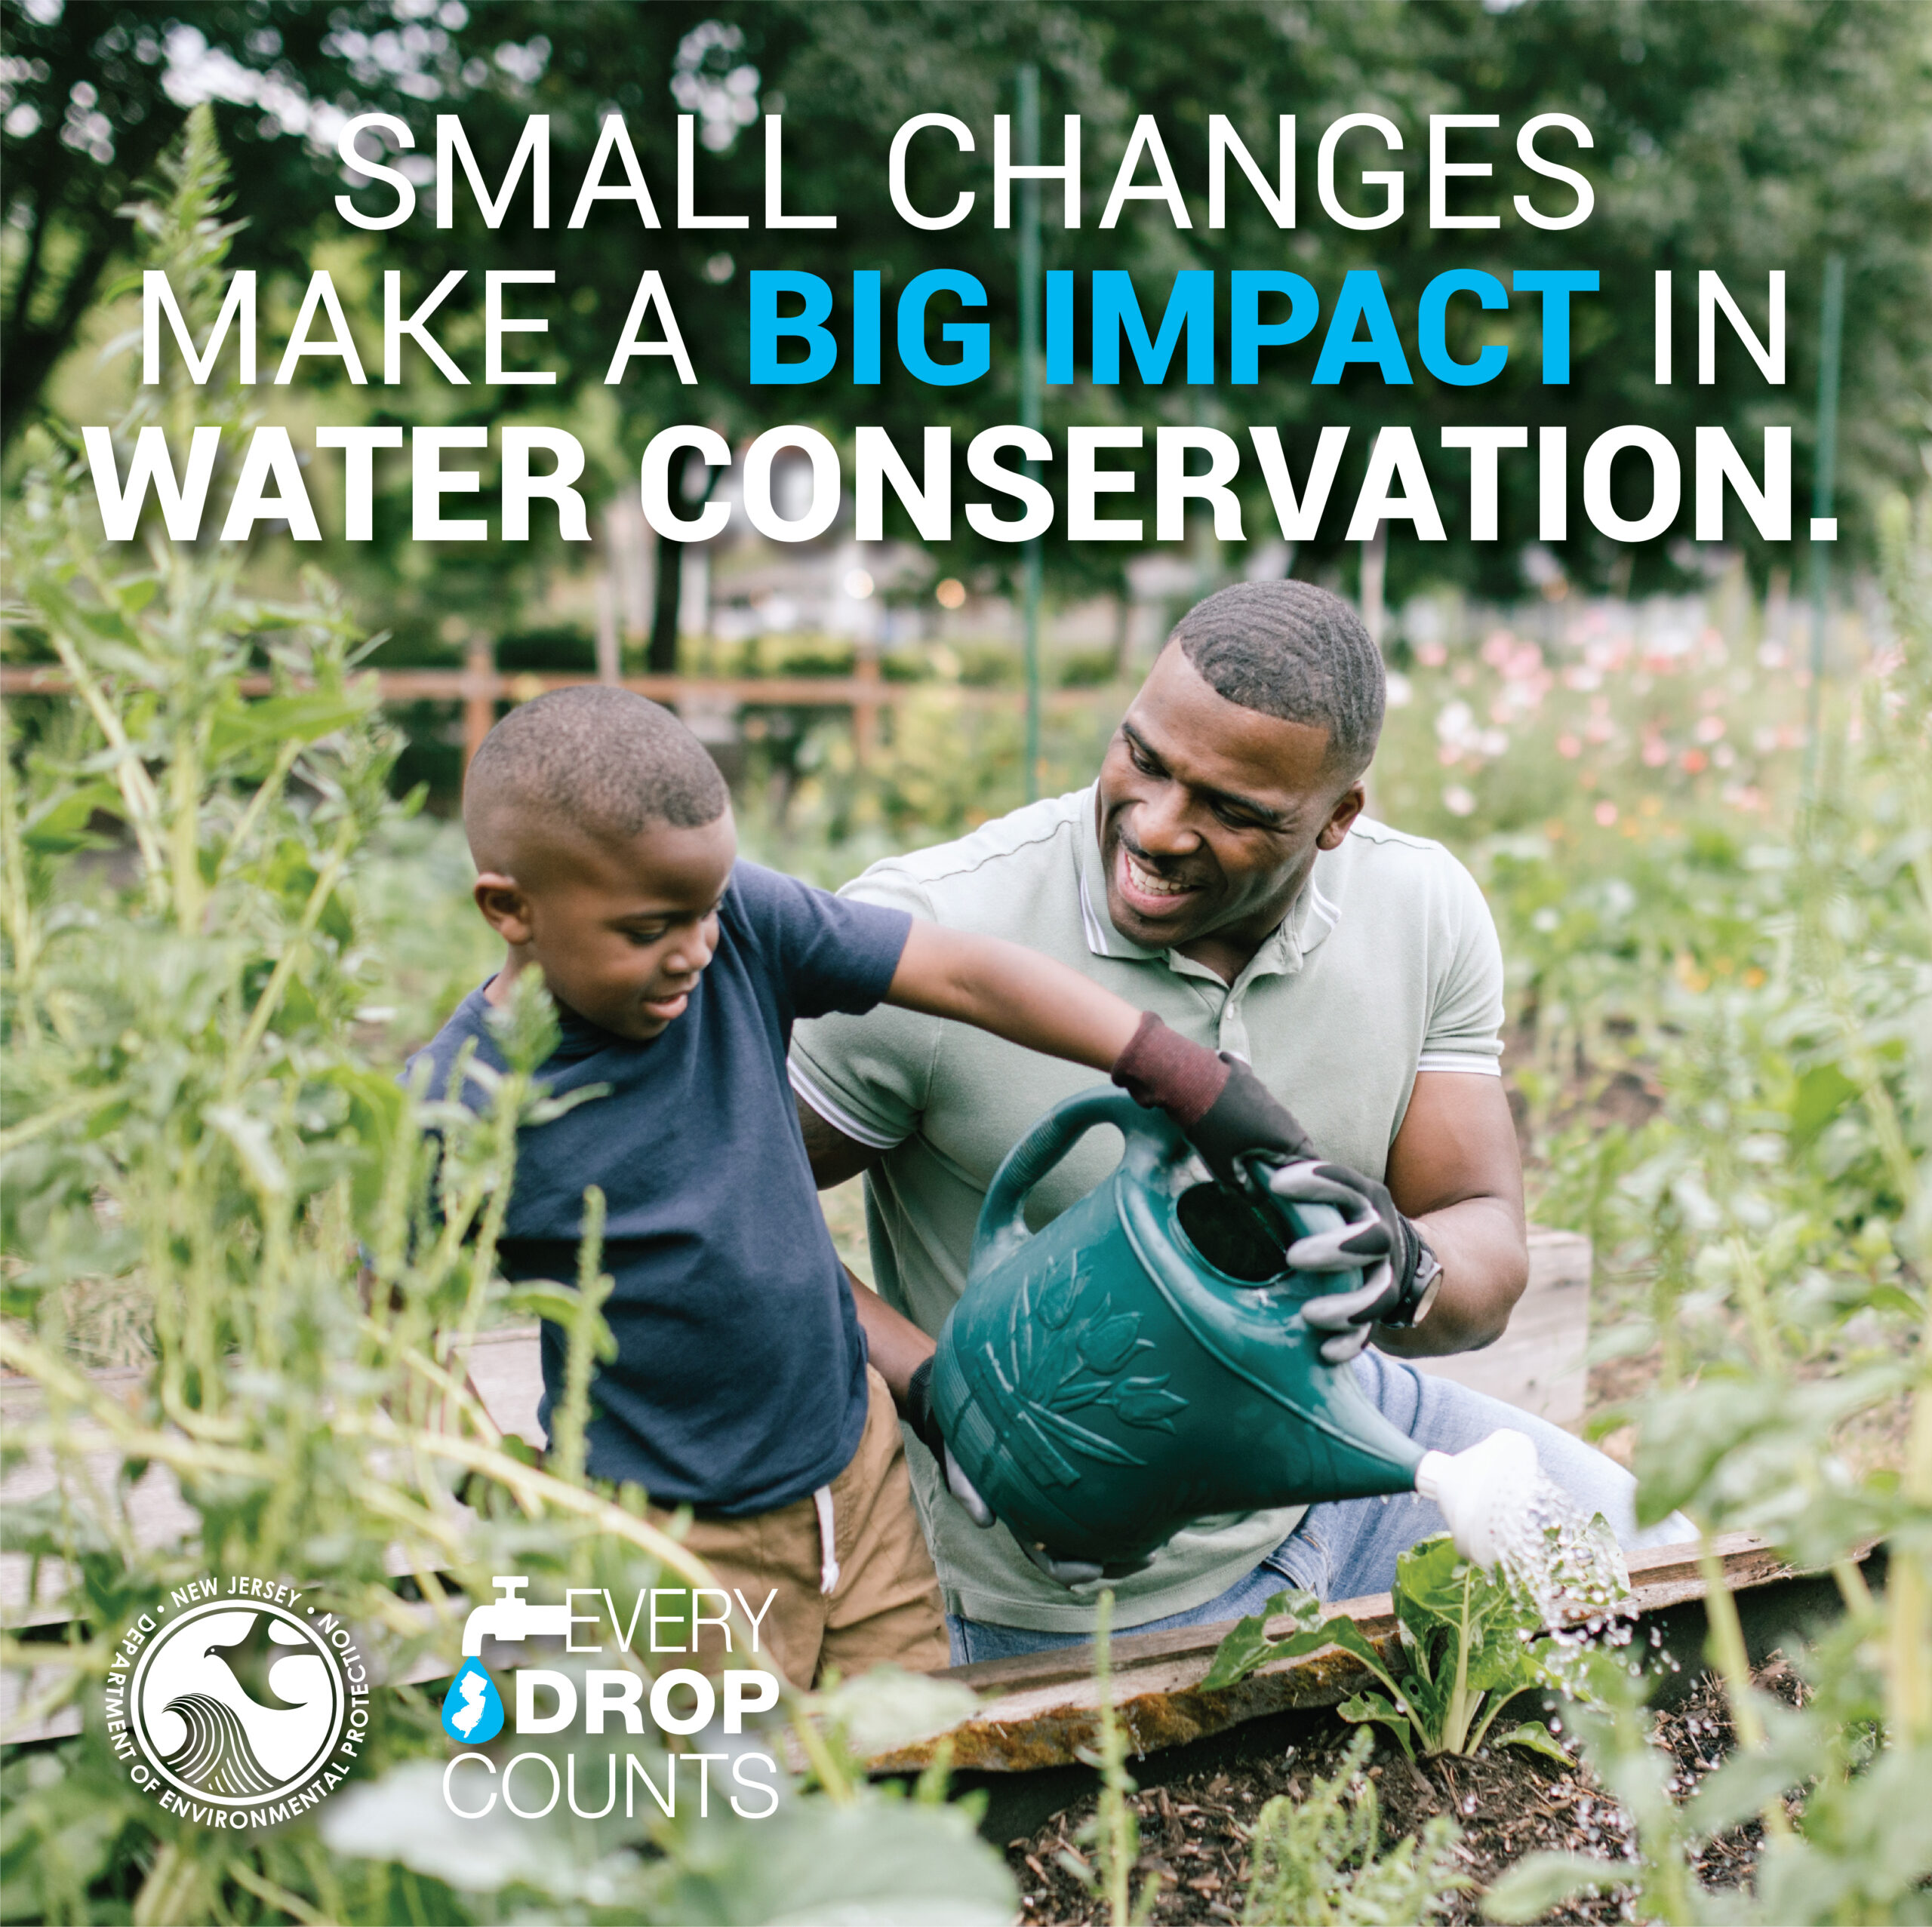 Small Changes Make a Big Impact in Water Conservation